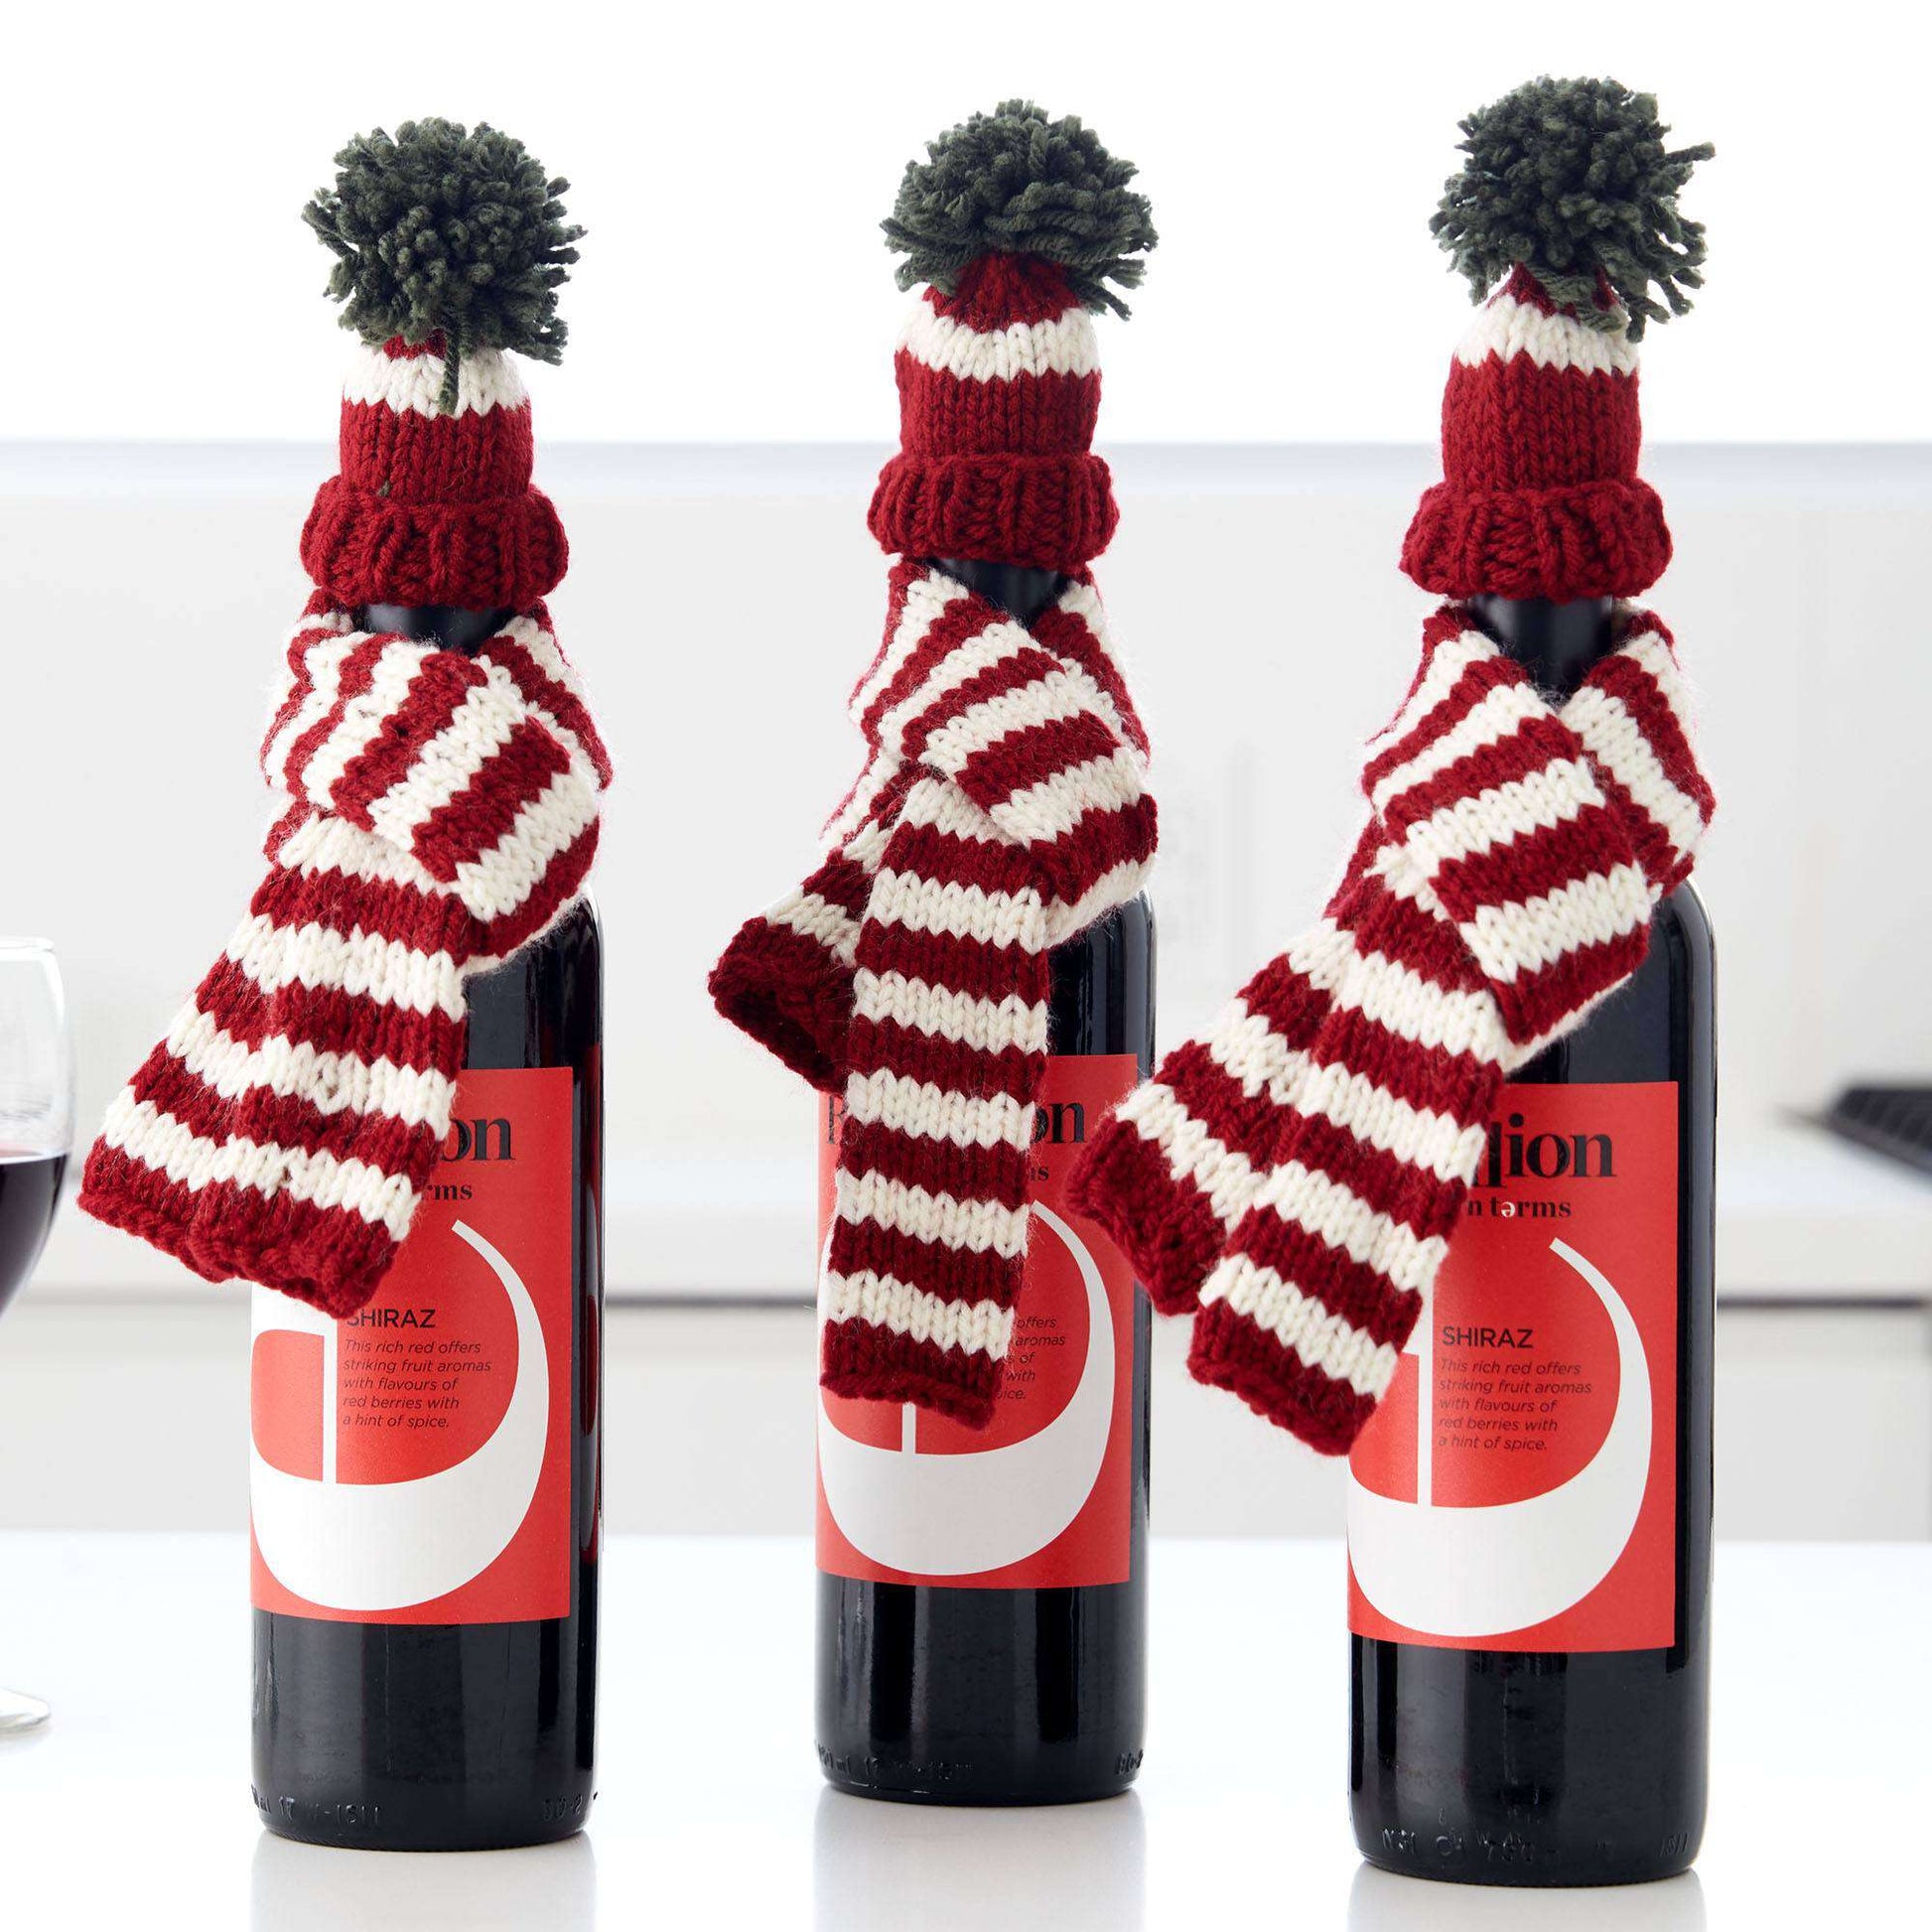 Bernat Knit Toque And Scarf Bottle Toppers Knit Holiday made in Bernat Super Value yarn